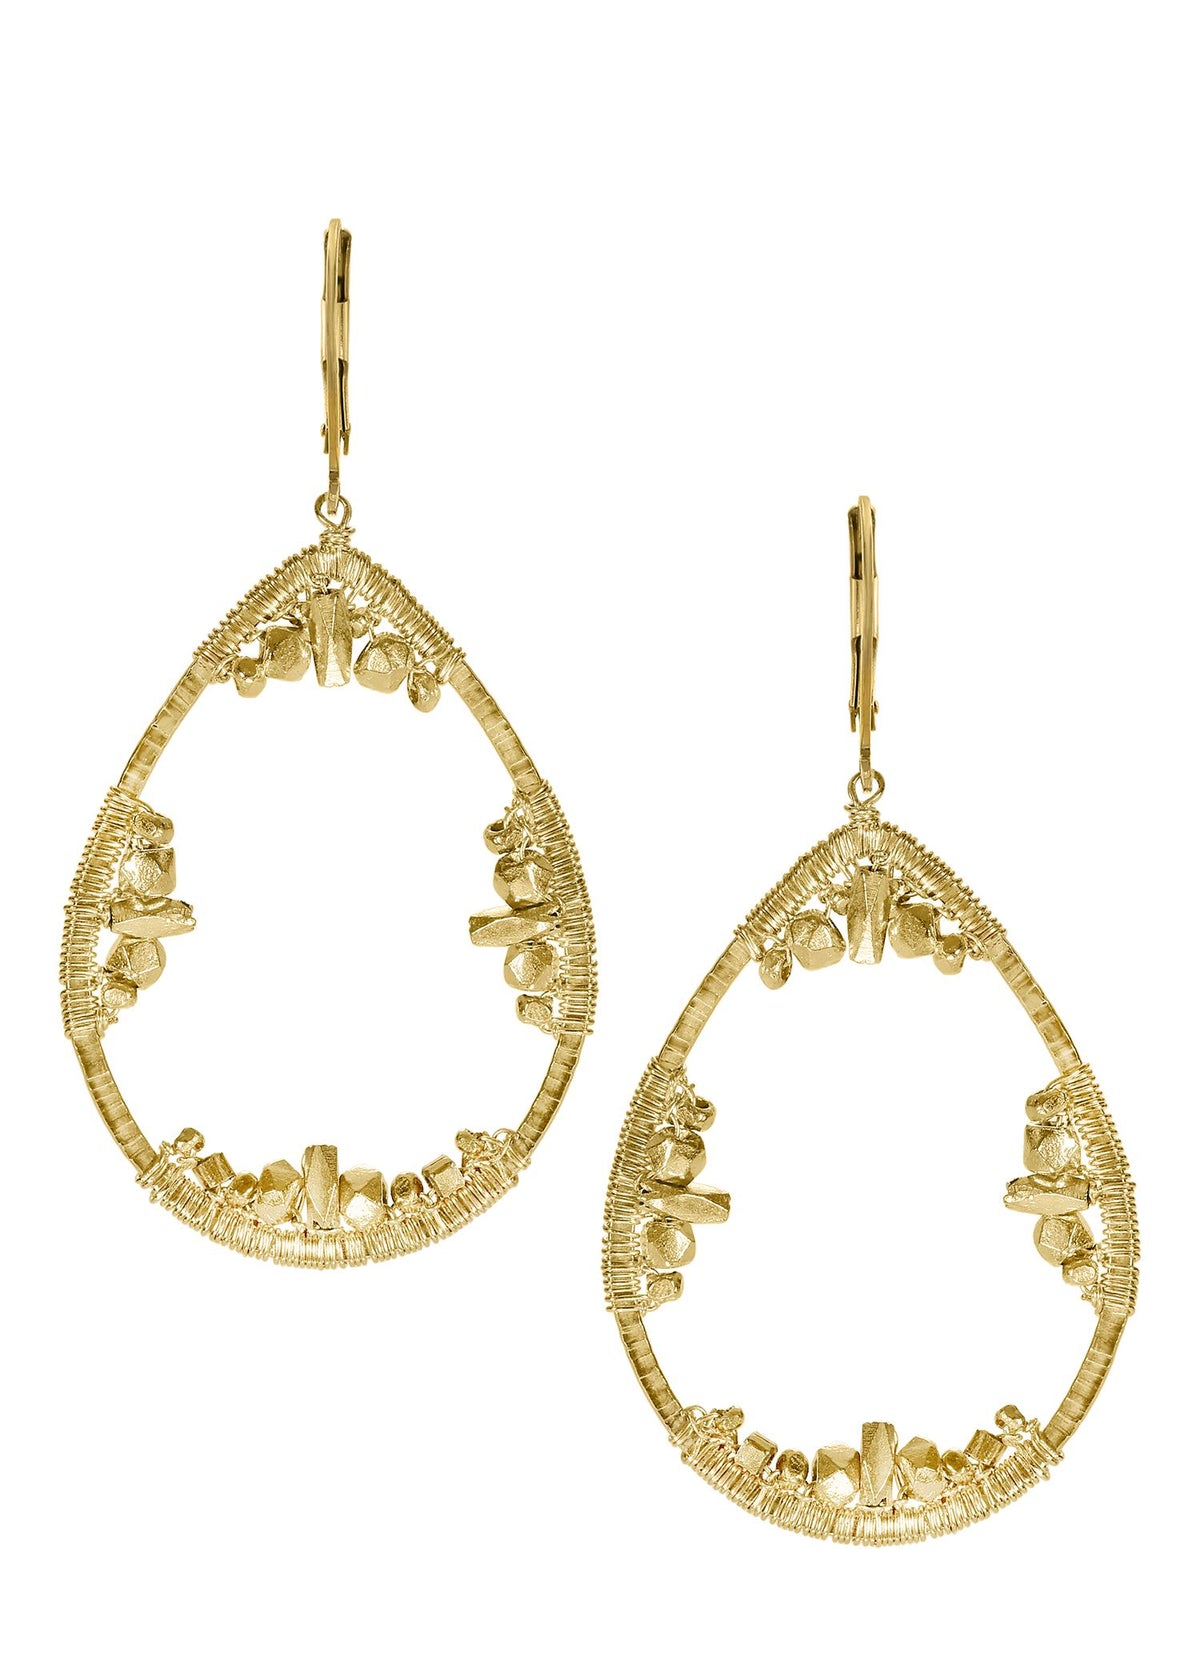 14k gold fill Earrings measure 2-1/8&quot; in length (including the levers) and 2-1/8&quot; in width Handmade in our Los Angeles studio